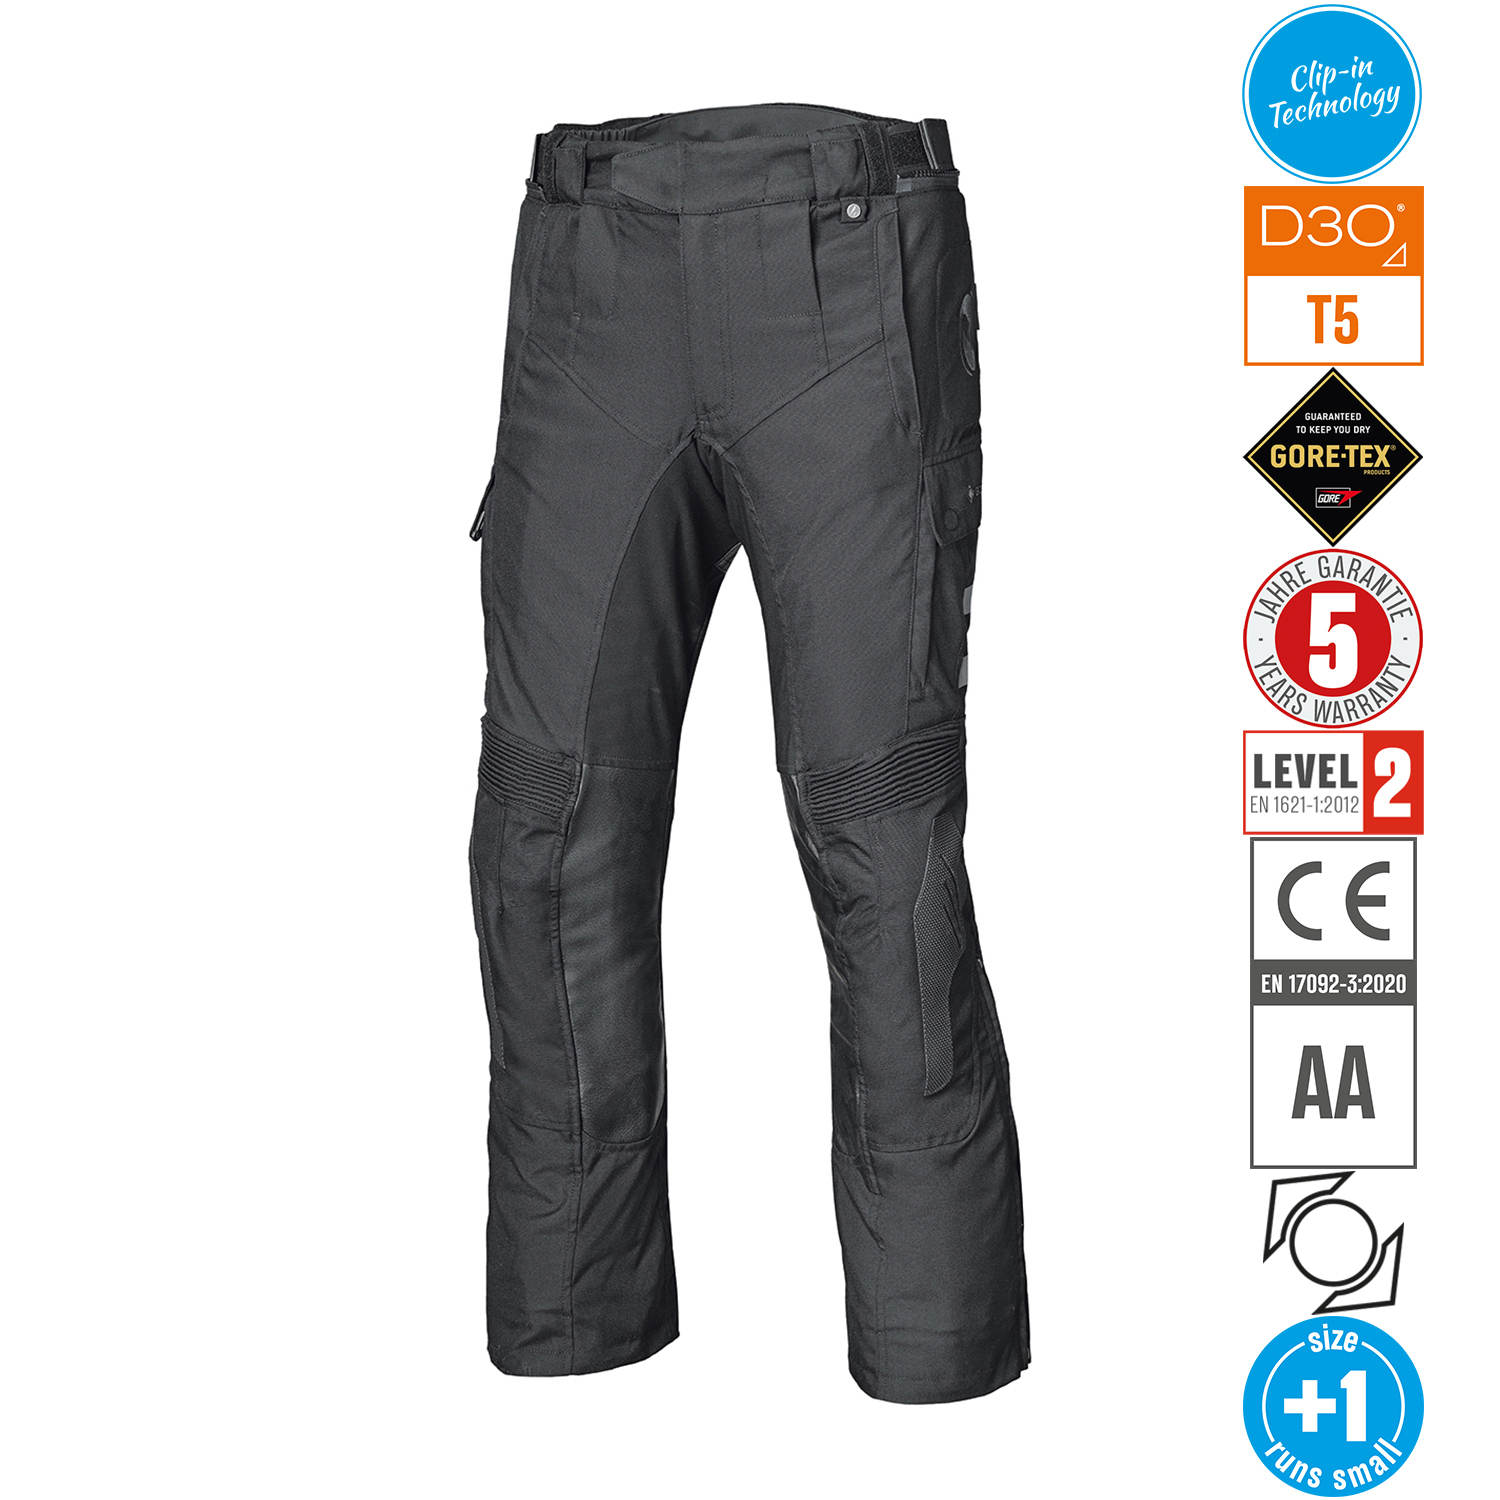 Held Torno Evo Pants Black - Available in Various Sizes